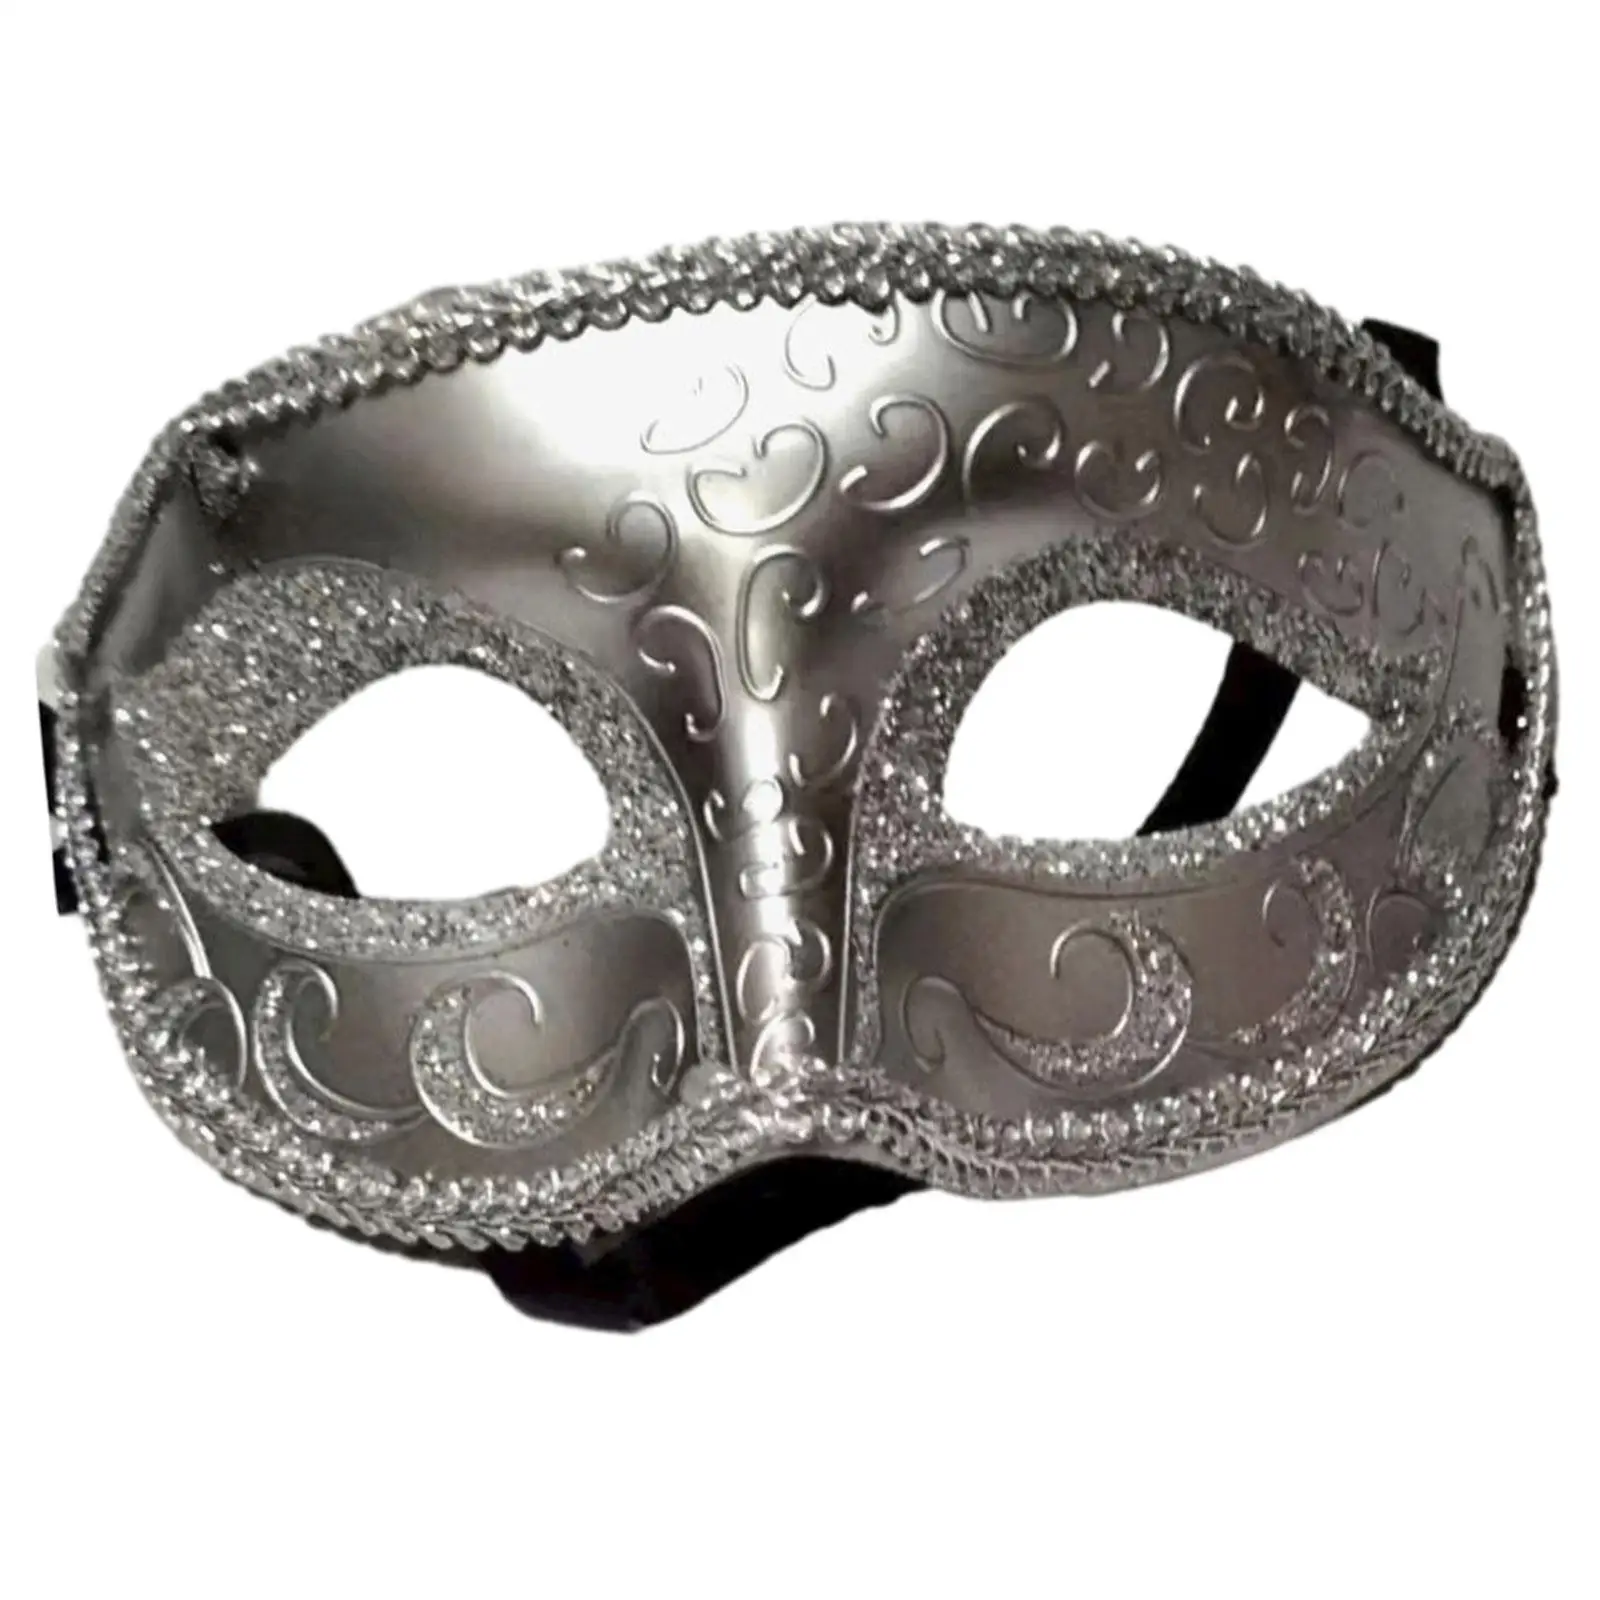 Masquerade Mask Costume Accessories for Club Carnival Fancy Dress